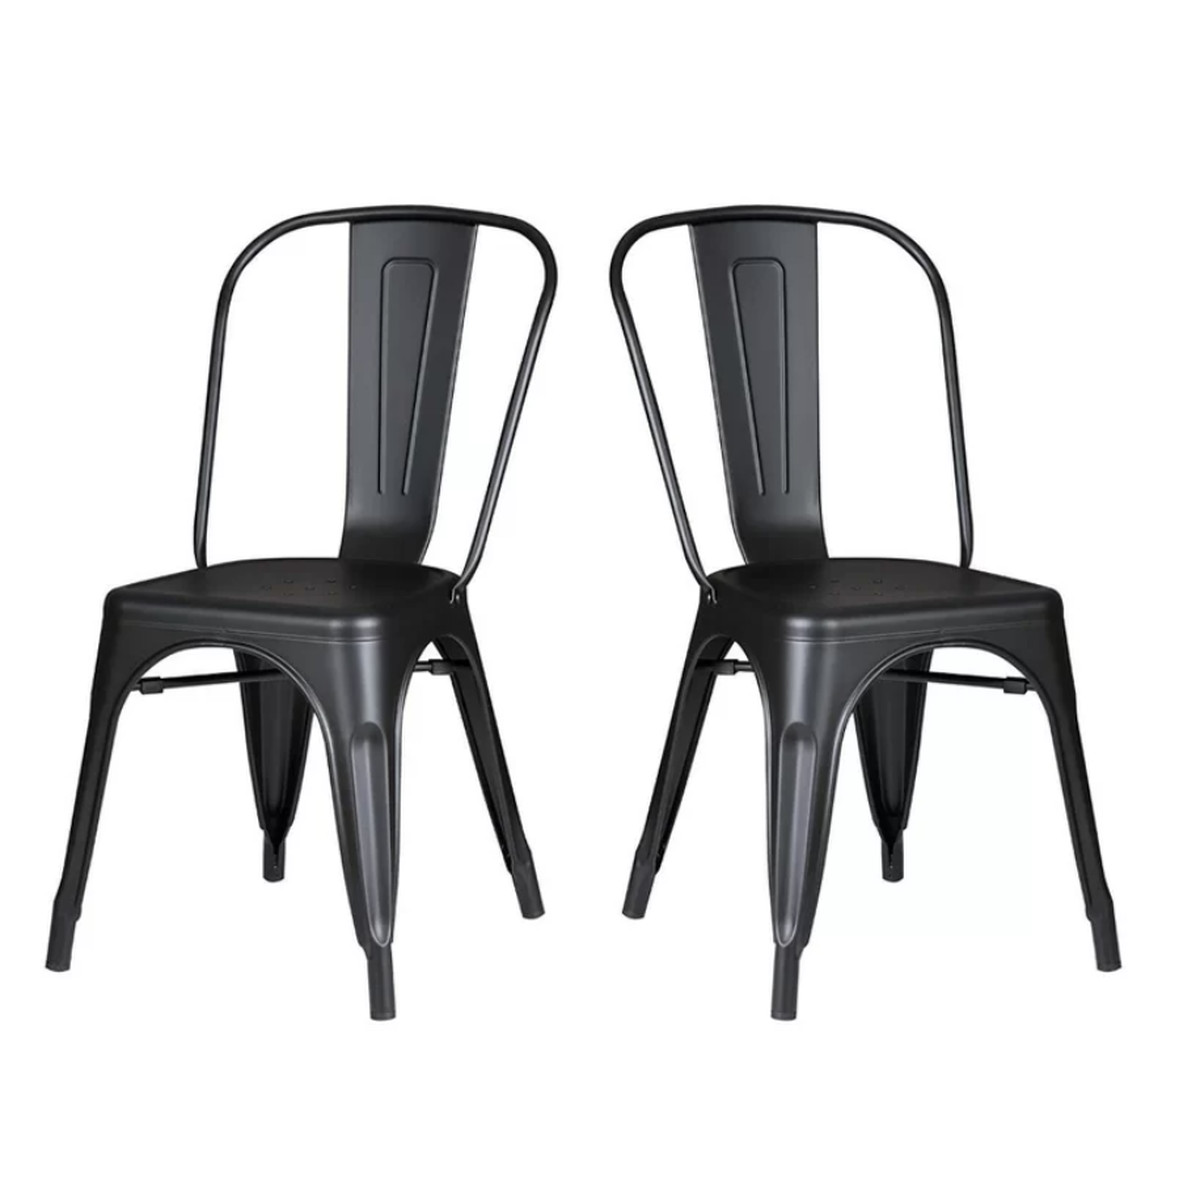 Two matte black chairs with four legs.  